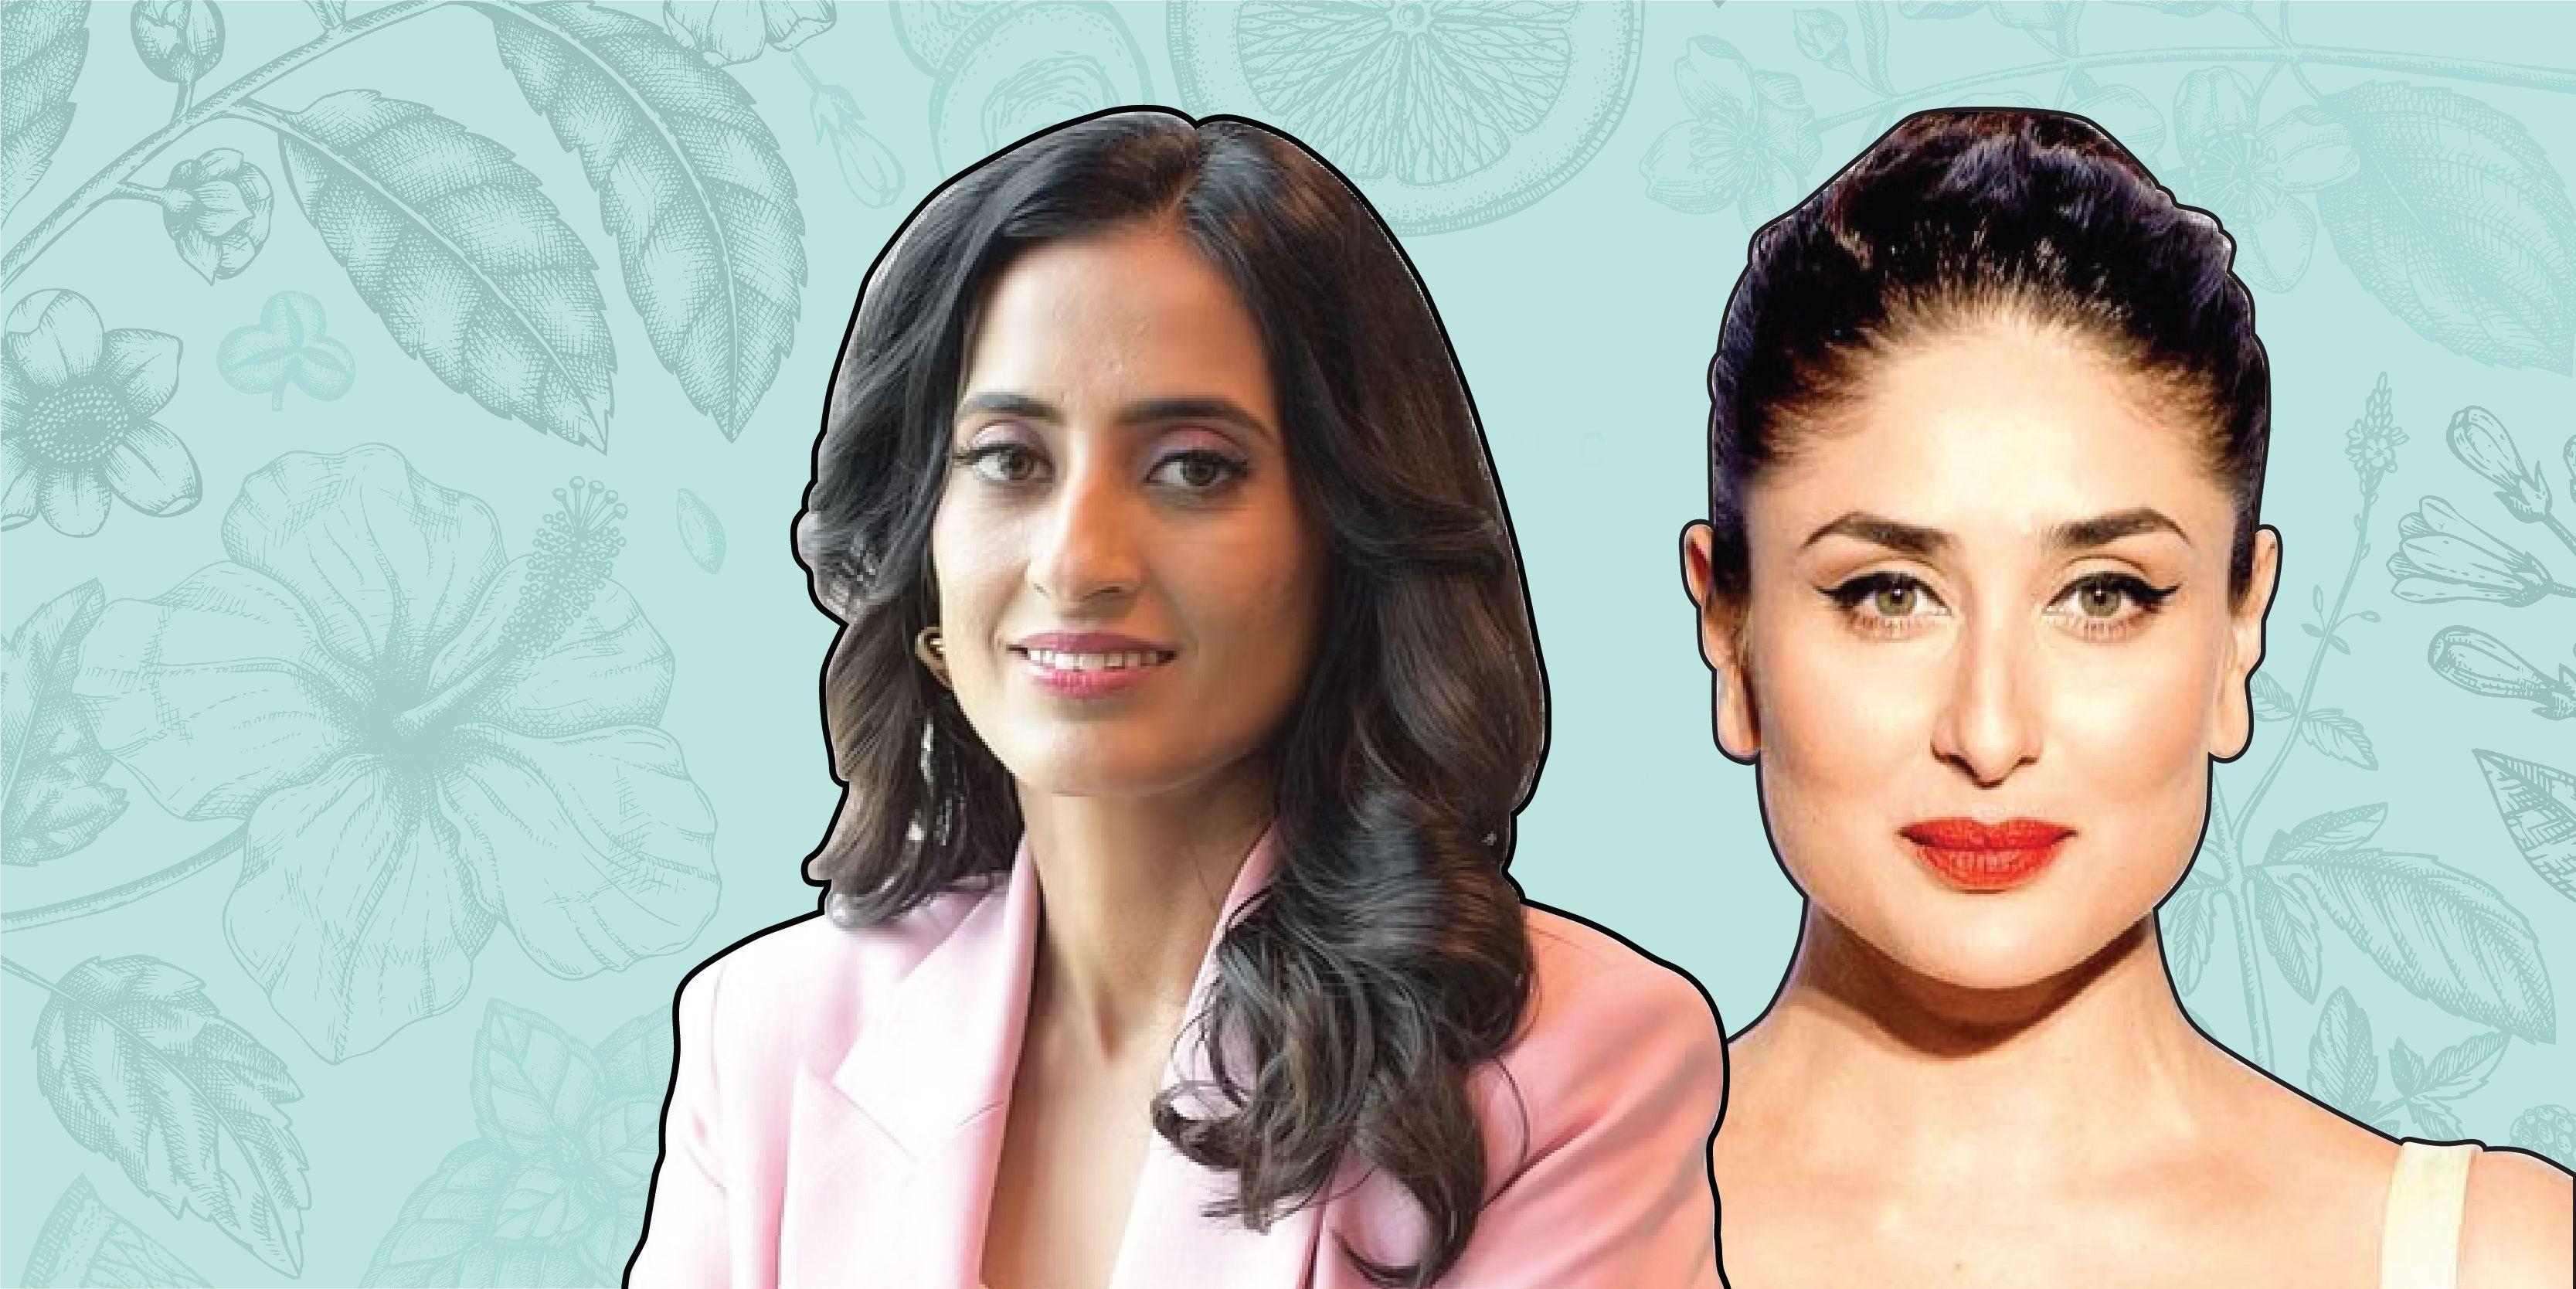 Kareena Kapoor Khan becomes co-owner of Quench Botanics, a K-beauty brand from the house of SUGAR Cosmetics